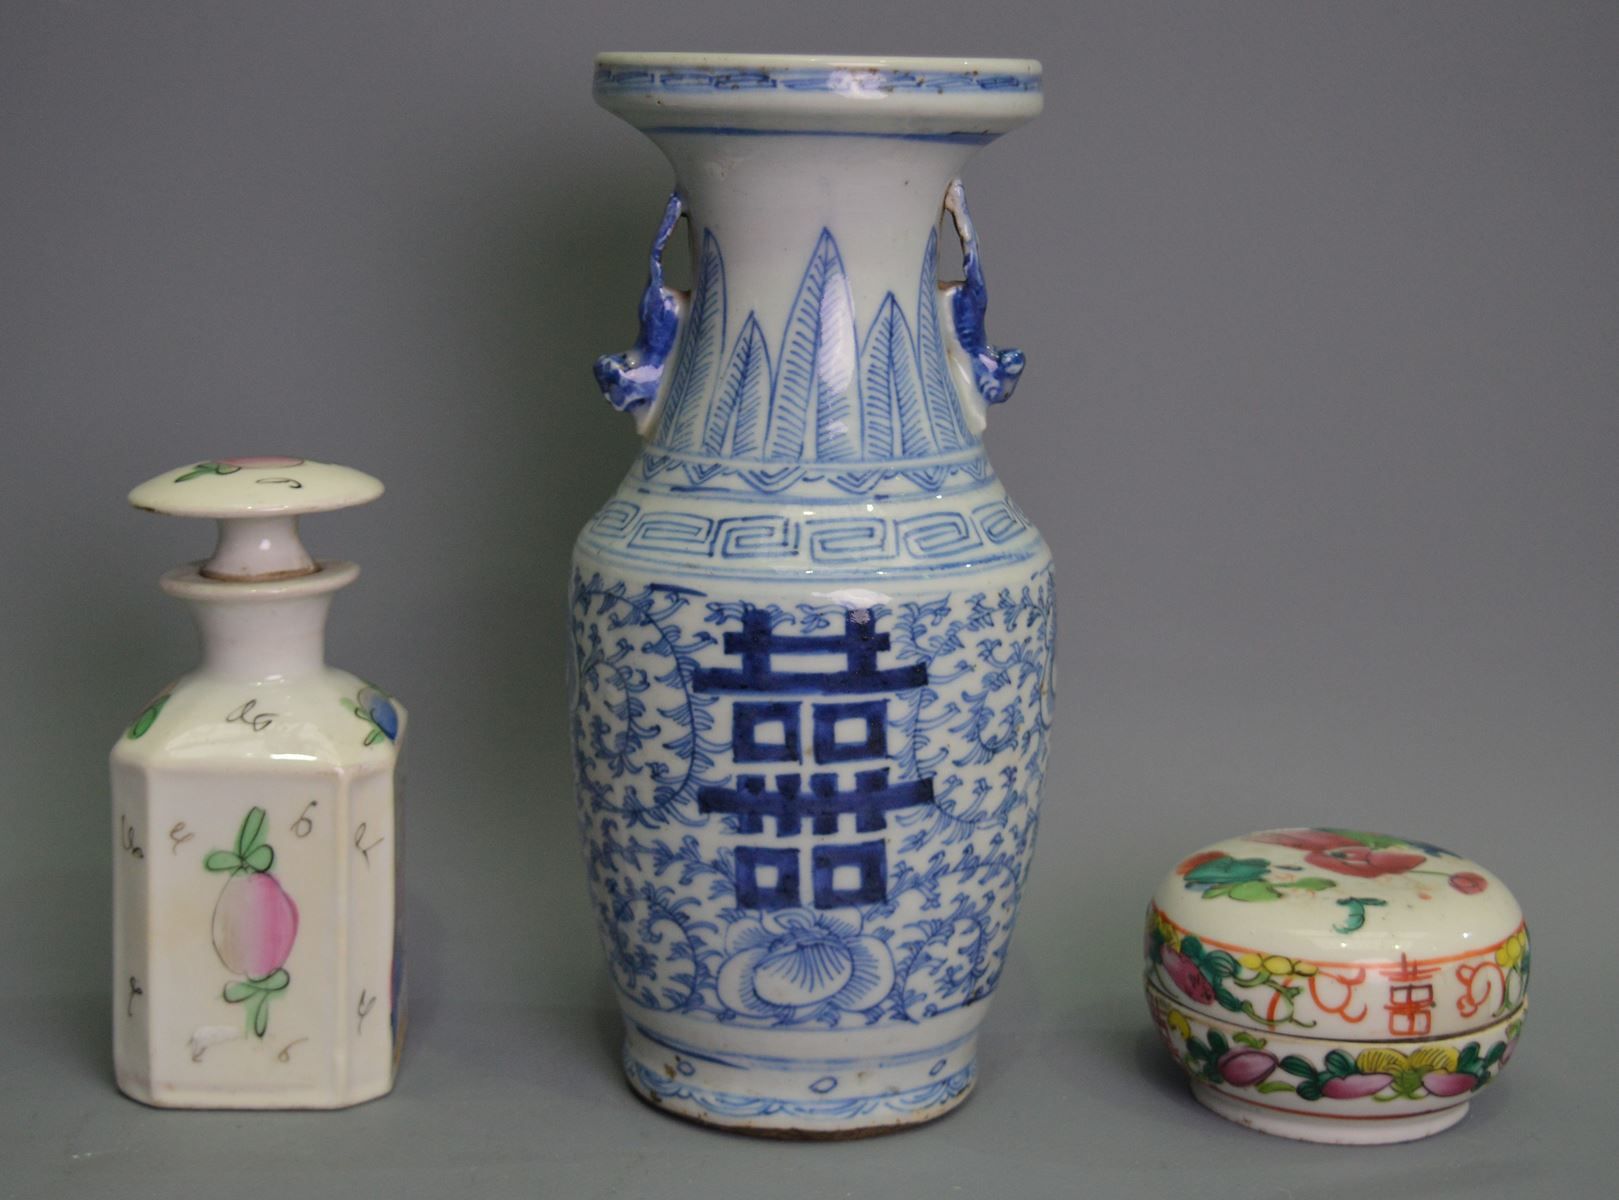 Null vases and small pot china, Ht: 23, 14, 5cm